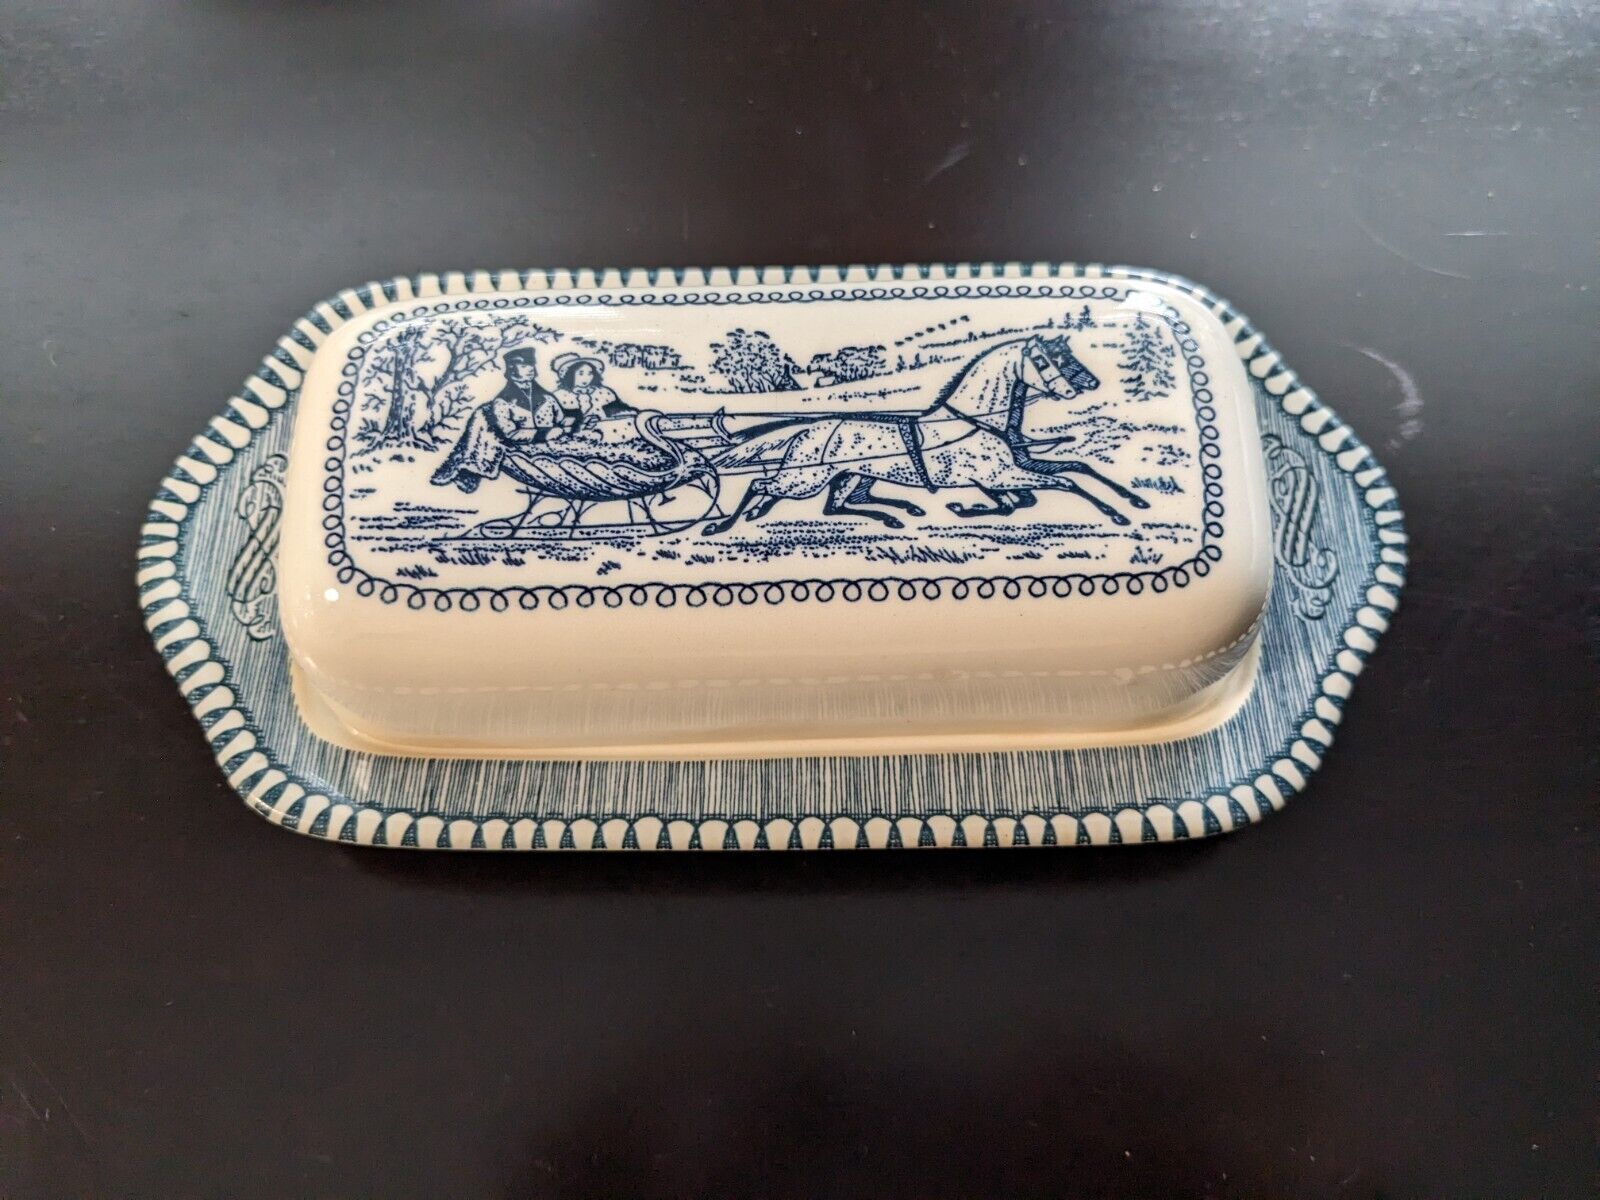 Currier and Ives Covered Butter Dish - Vintage Blue and White Royal China